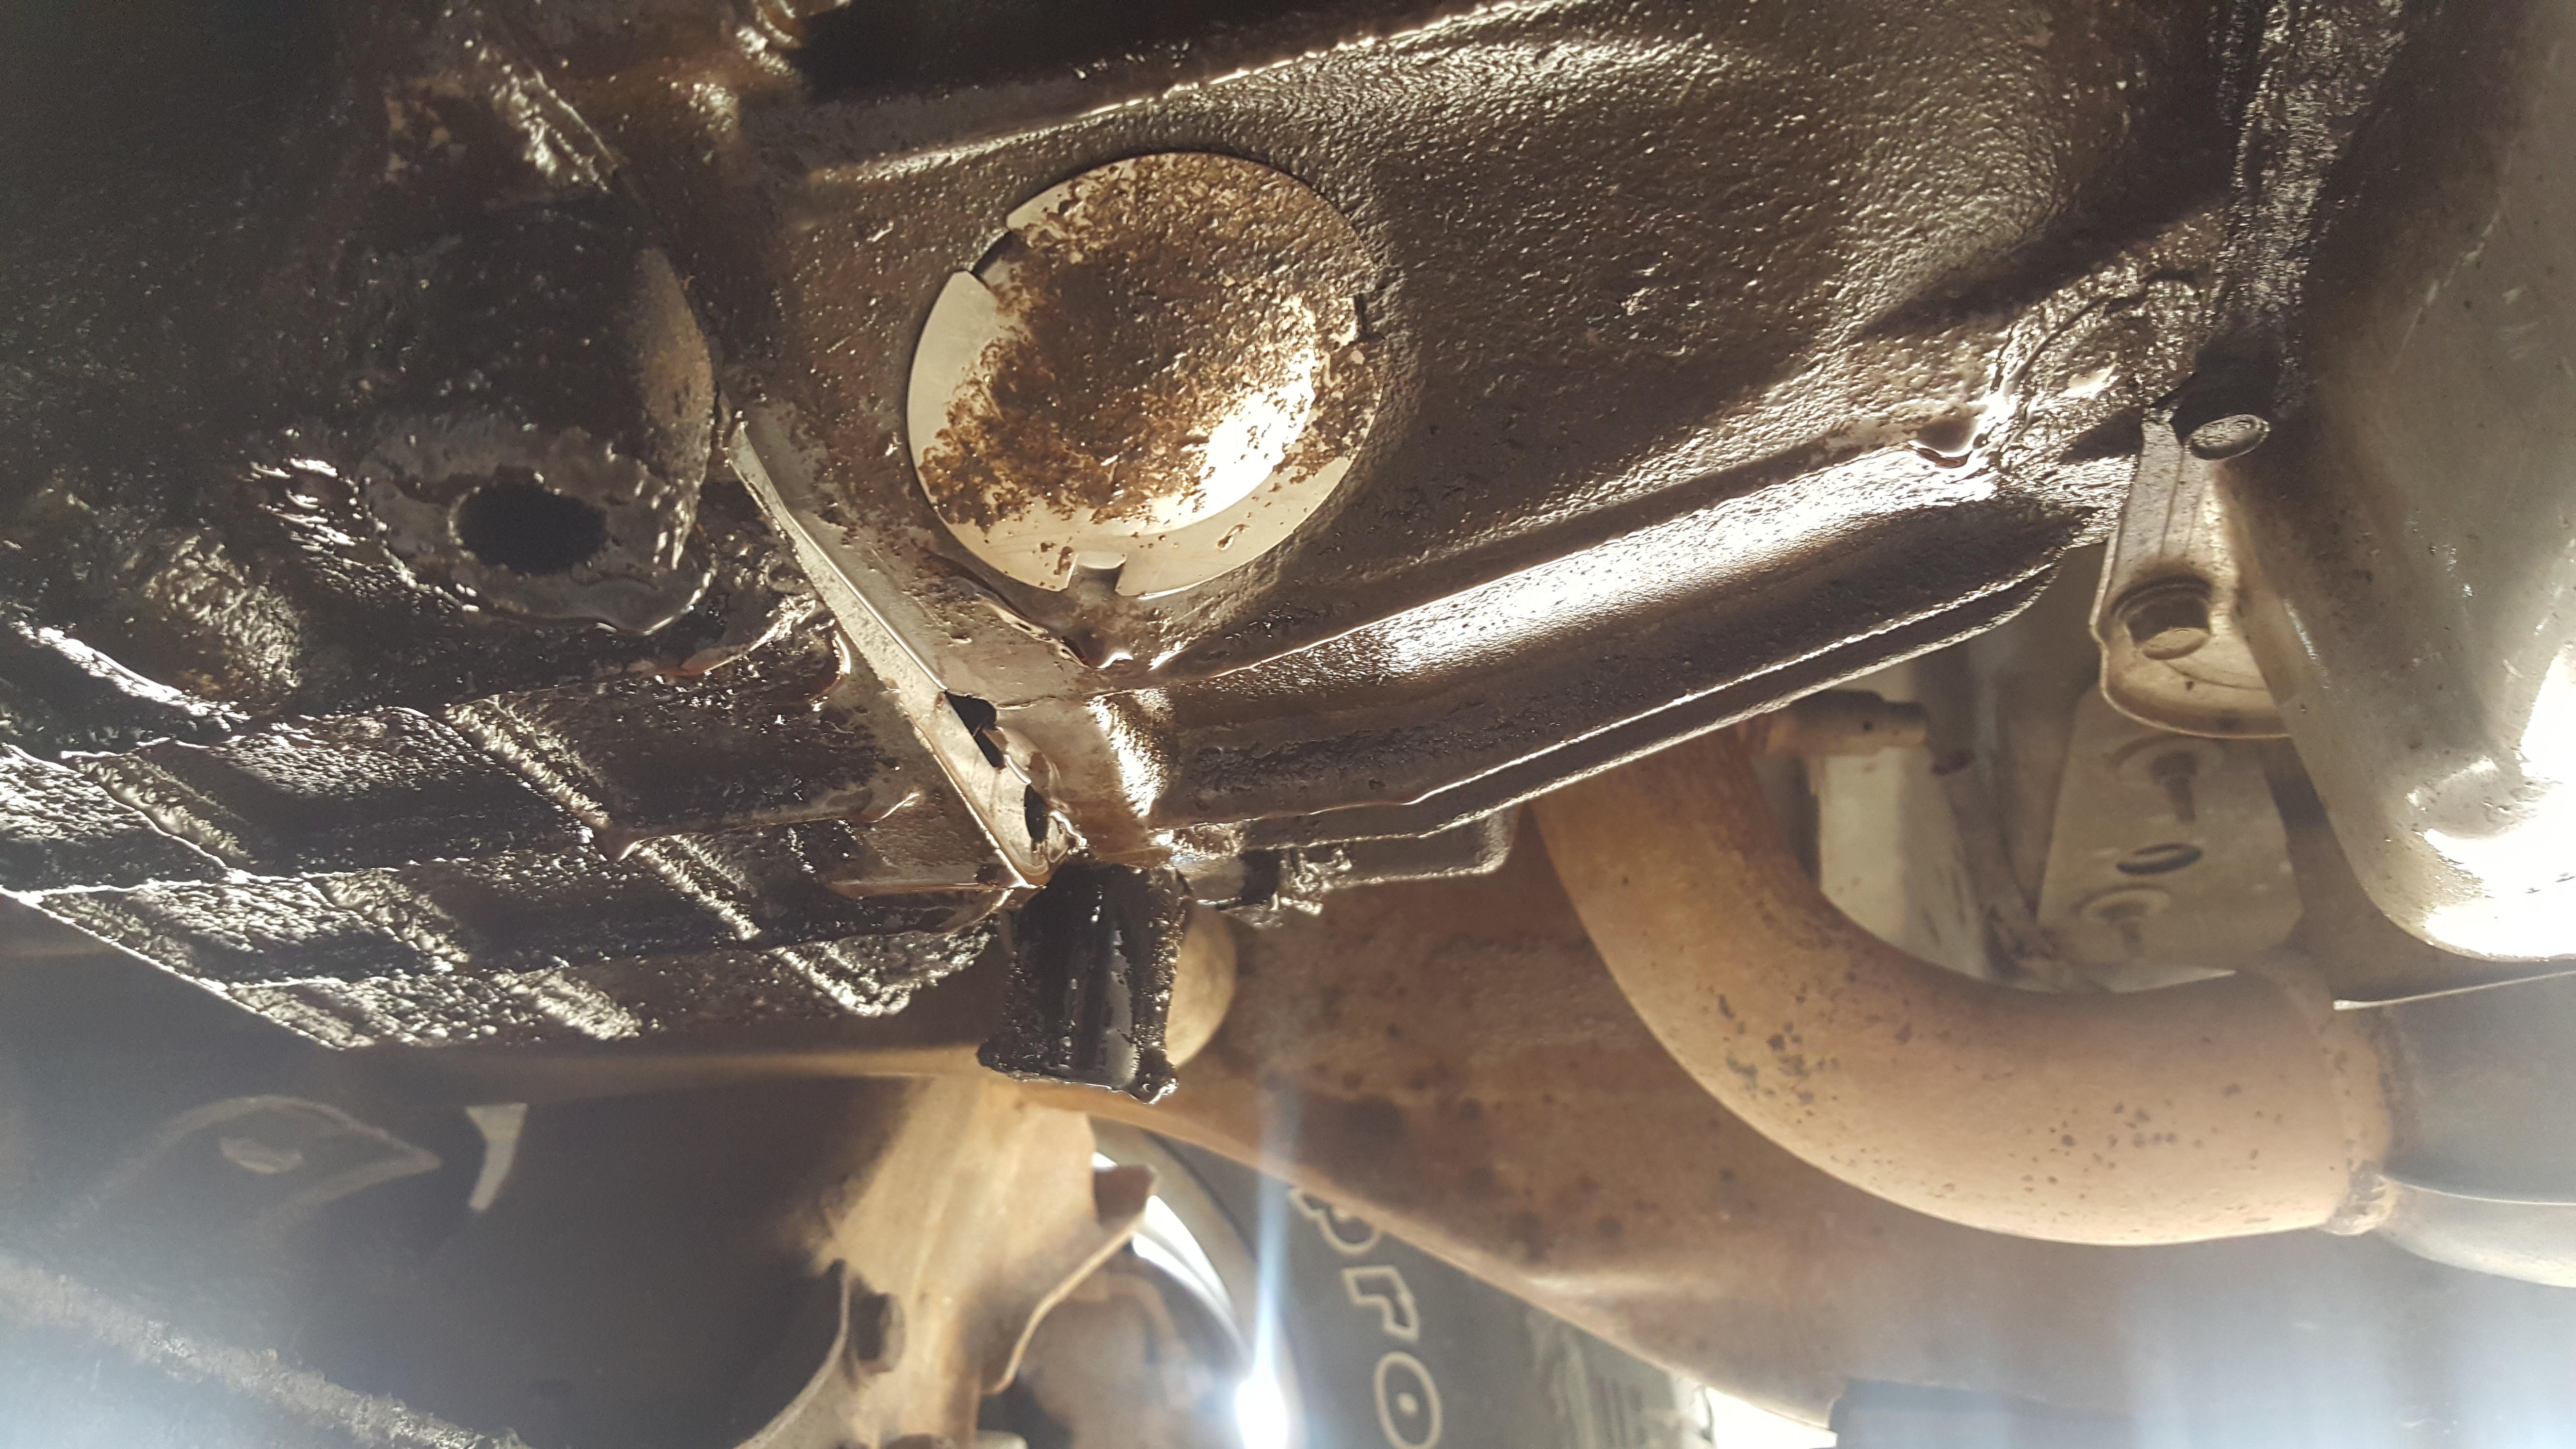 Bad oil leak - I need advice - Chevrolet Forum - Chevy Enthusiasts Forums